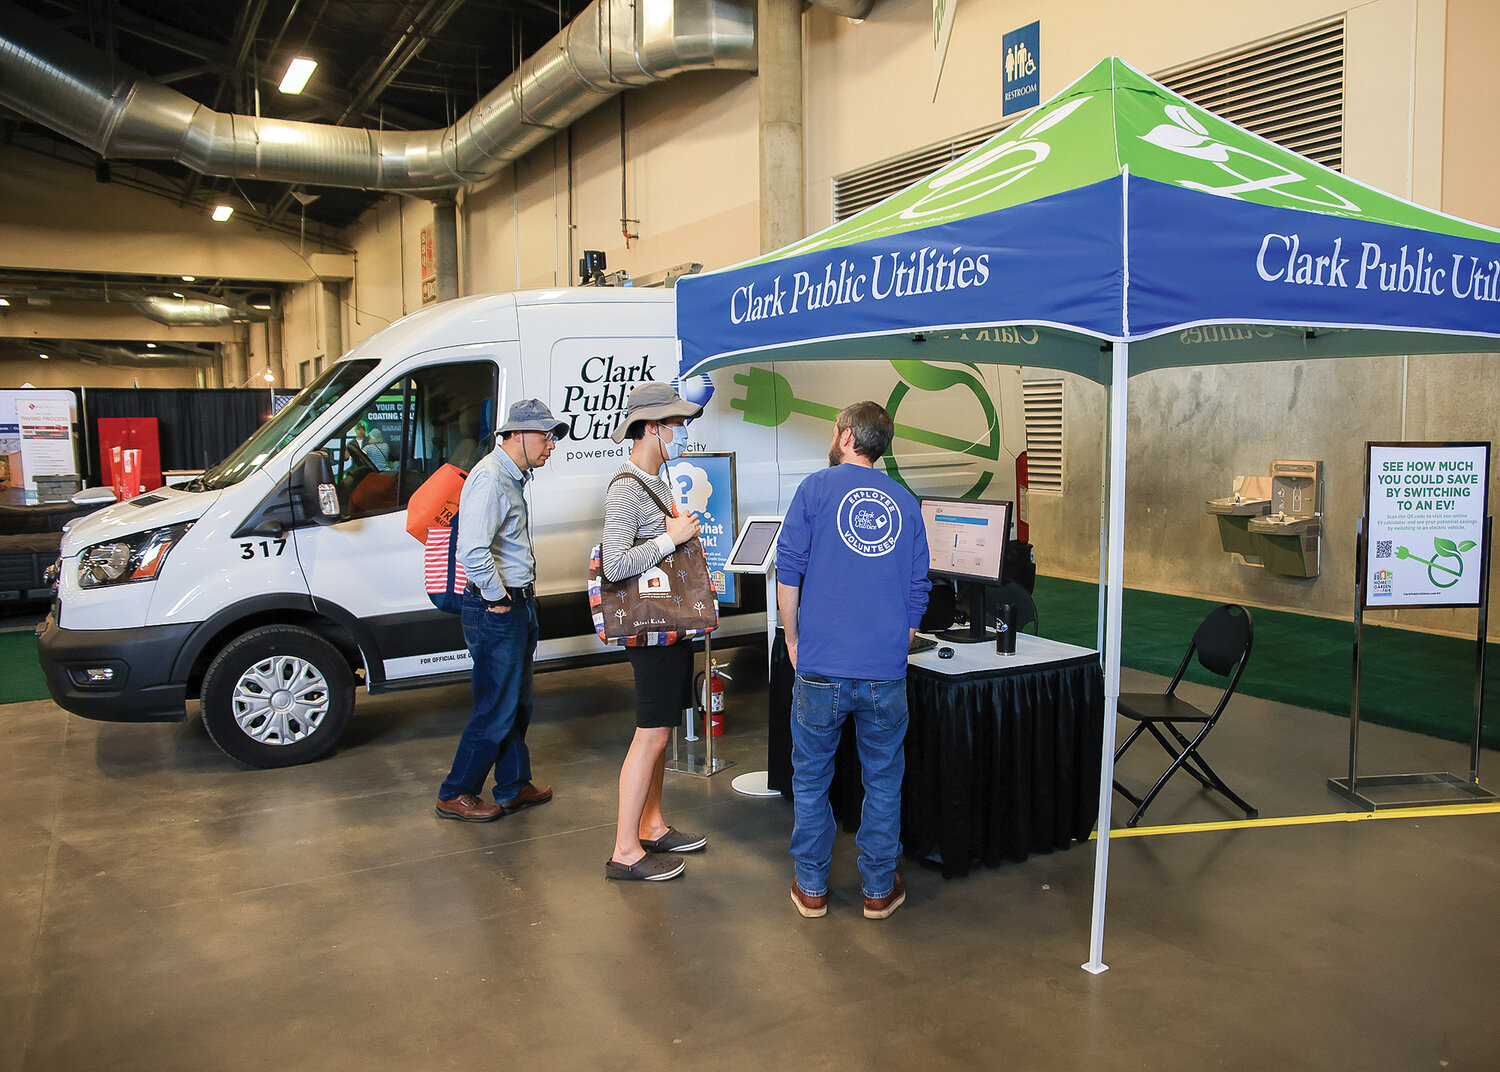 A Clark Public Utilities employee educates people about electric vehicles and at home charging stations at the Home and Garden Idea Fair in Ridgefield on Saturday, April 29. In the background is a fully electric work van that CPU utilizes.